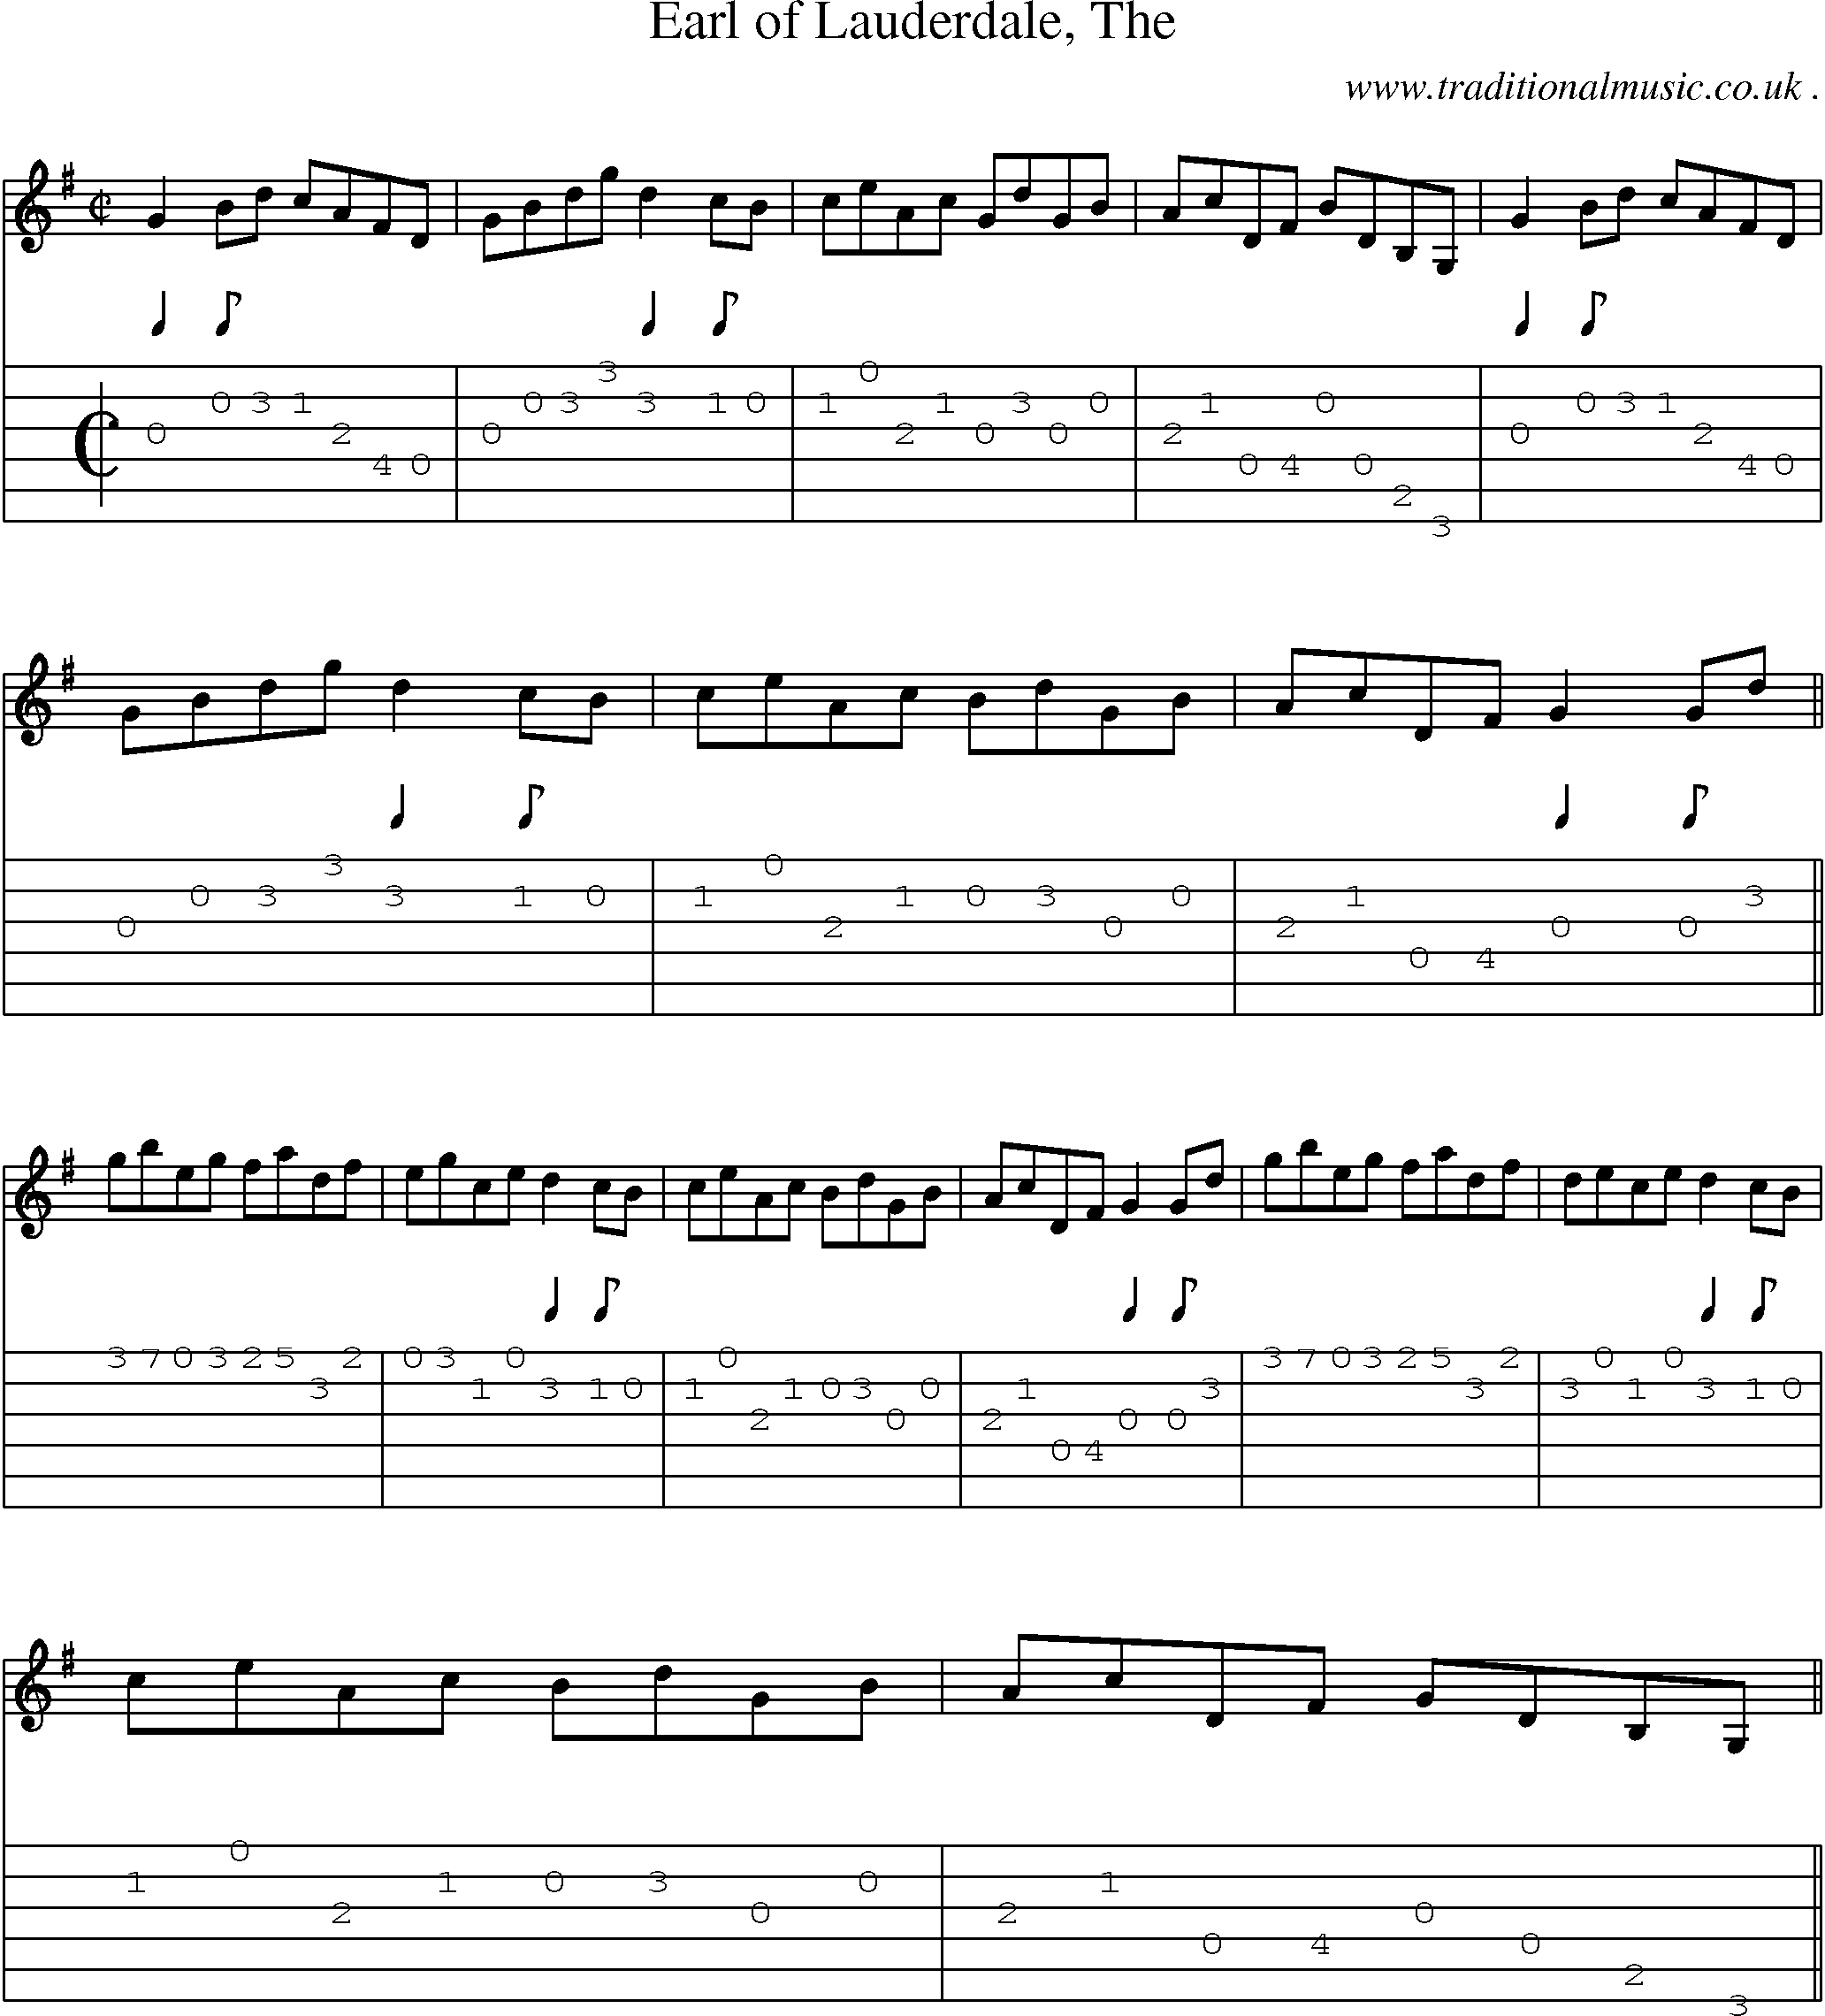 Sheet-music  score, Chords and Guitar Tabs for Earl Of Lauderdale The